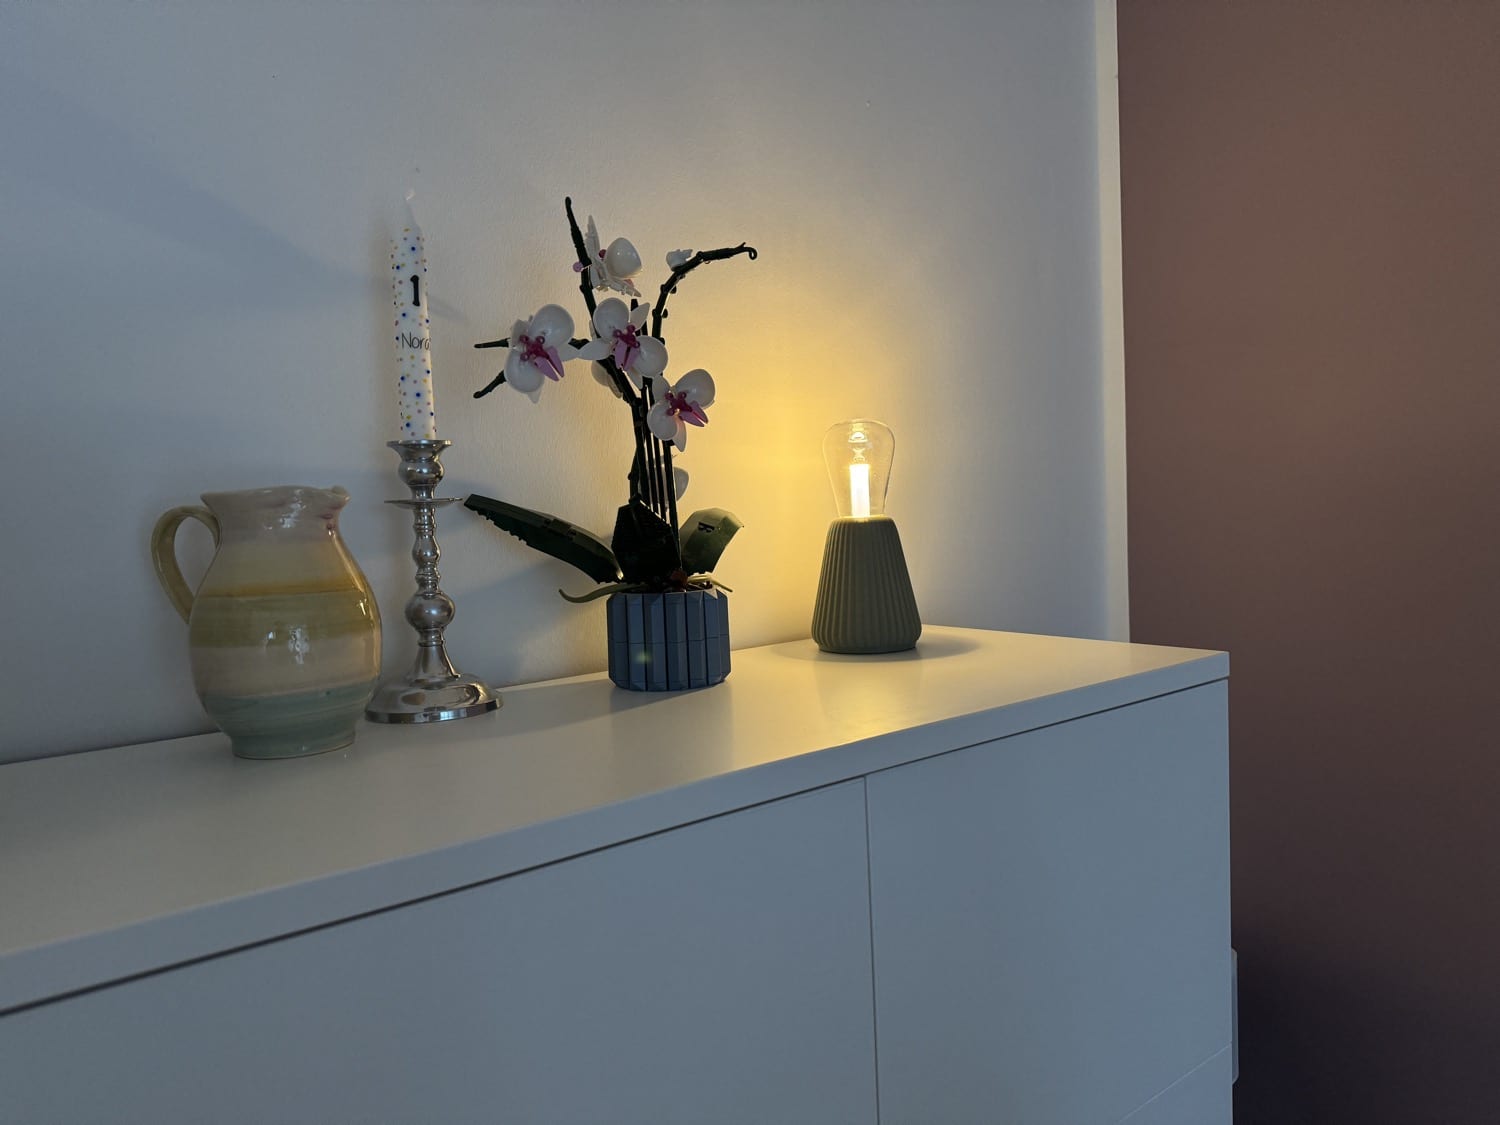 Hueblog: Philips Hue Lightguide review: Now available in five shapes